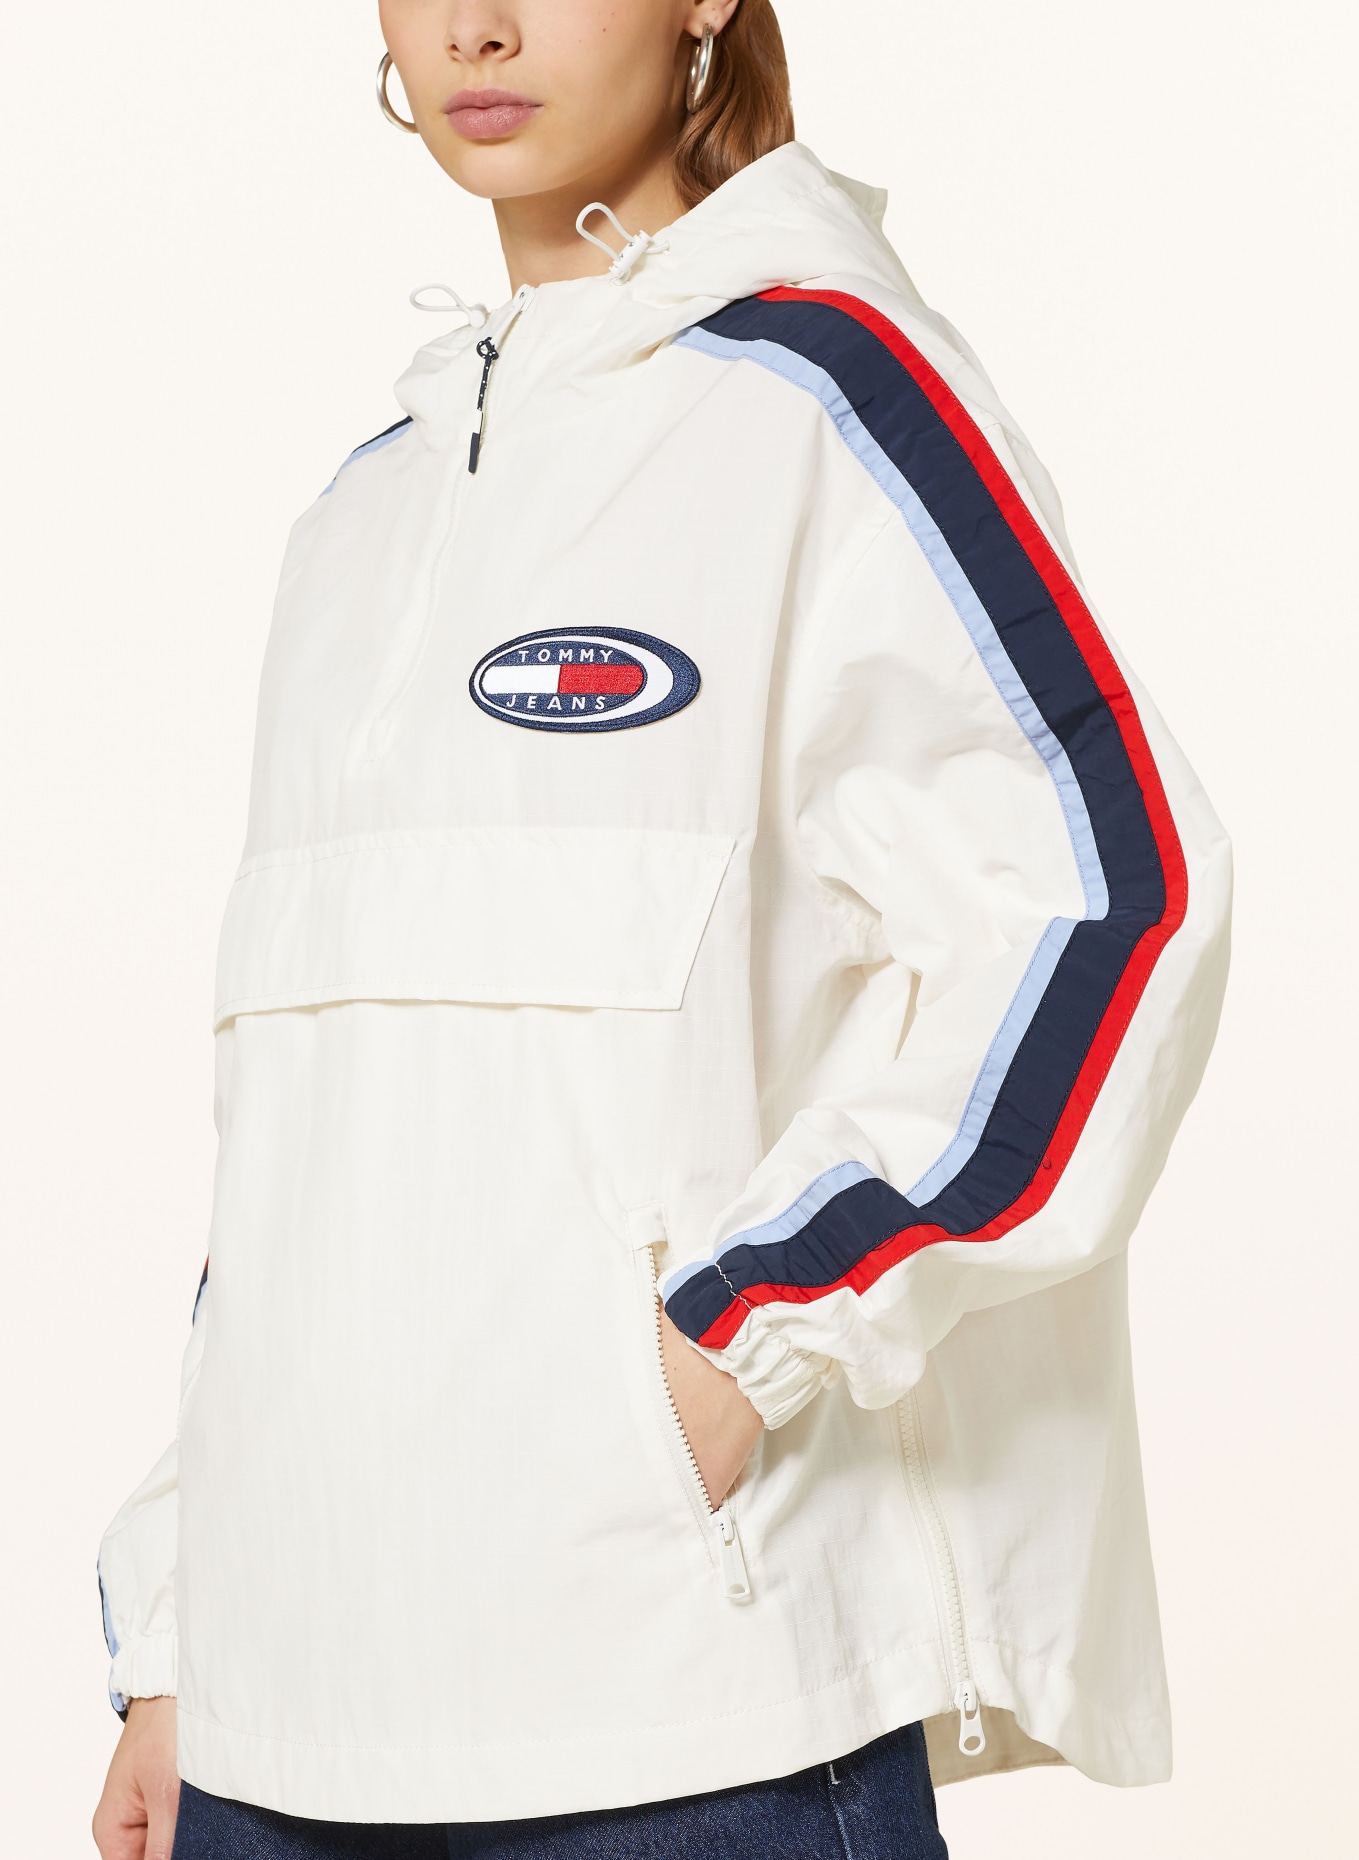 TOMMY JEANS Anorak jacket, Color: WHITE/ DARK BLUE/ RED (Image 5)